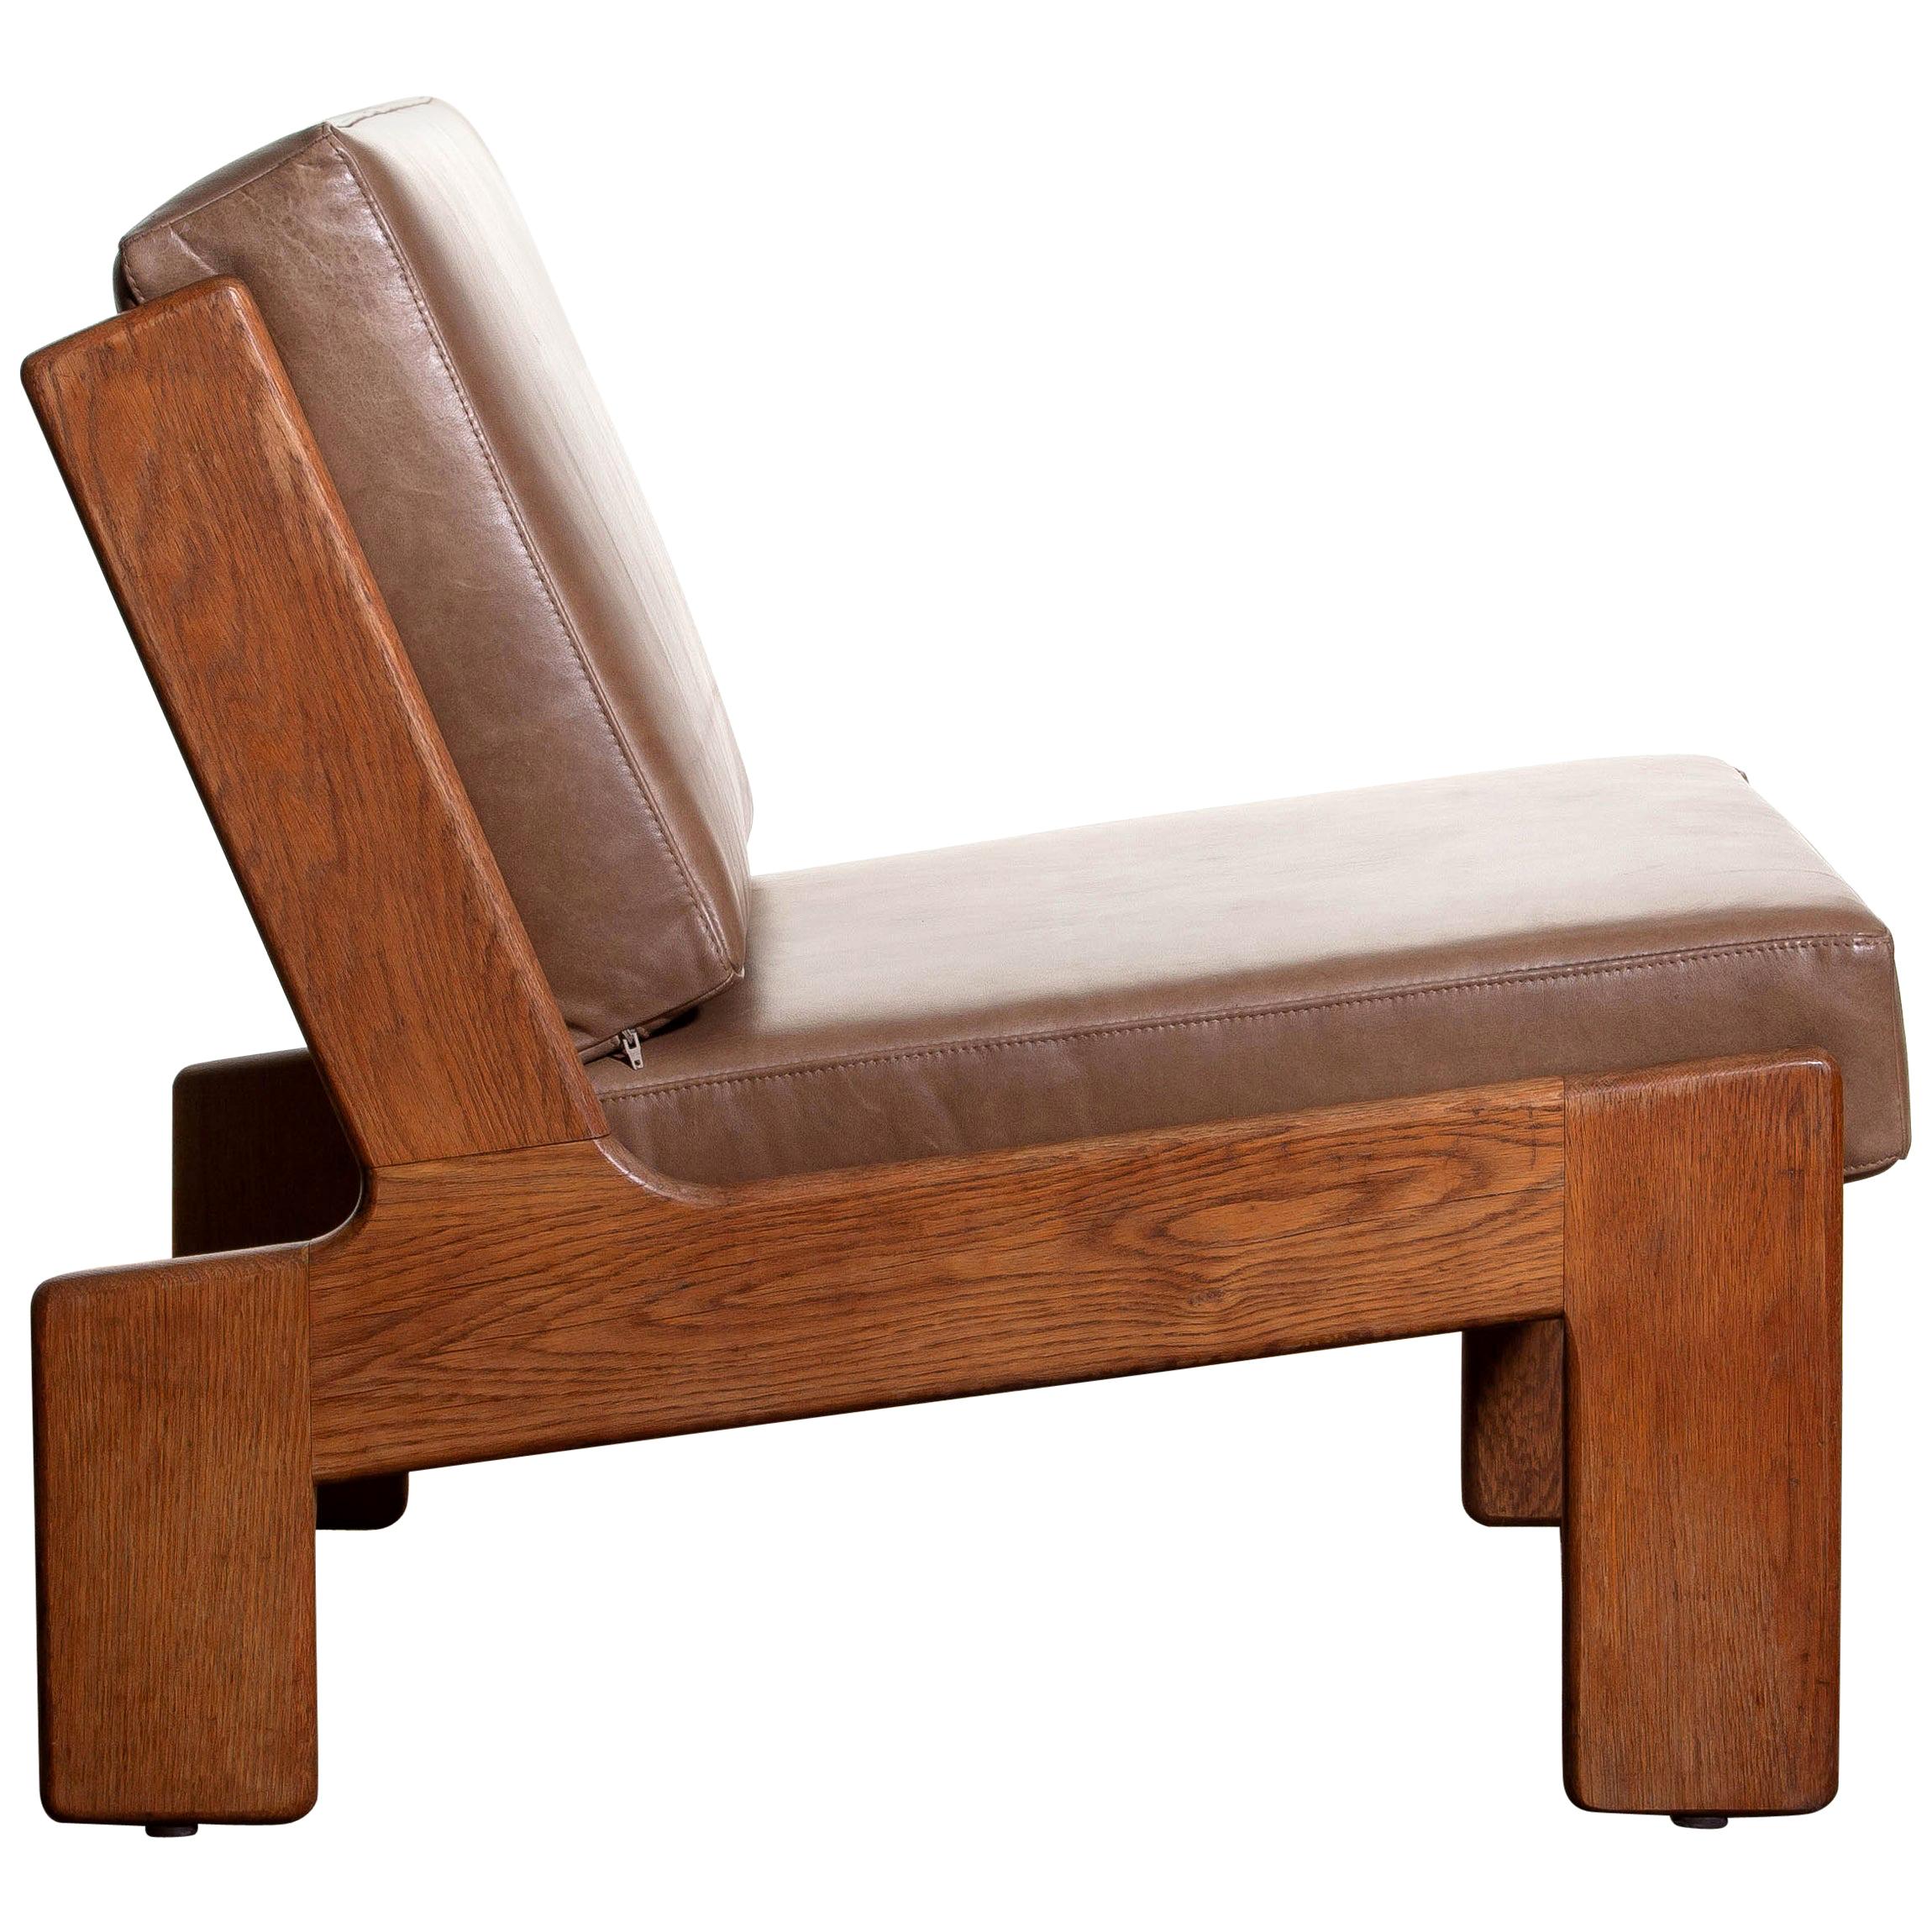 Finnish 1960s, Oak and Leather Cubist Lounge Chair by Esko Pajamies for Asko, Finland